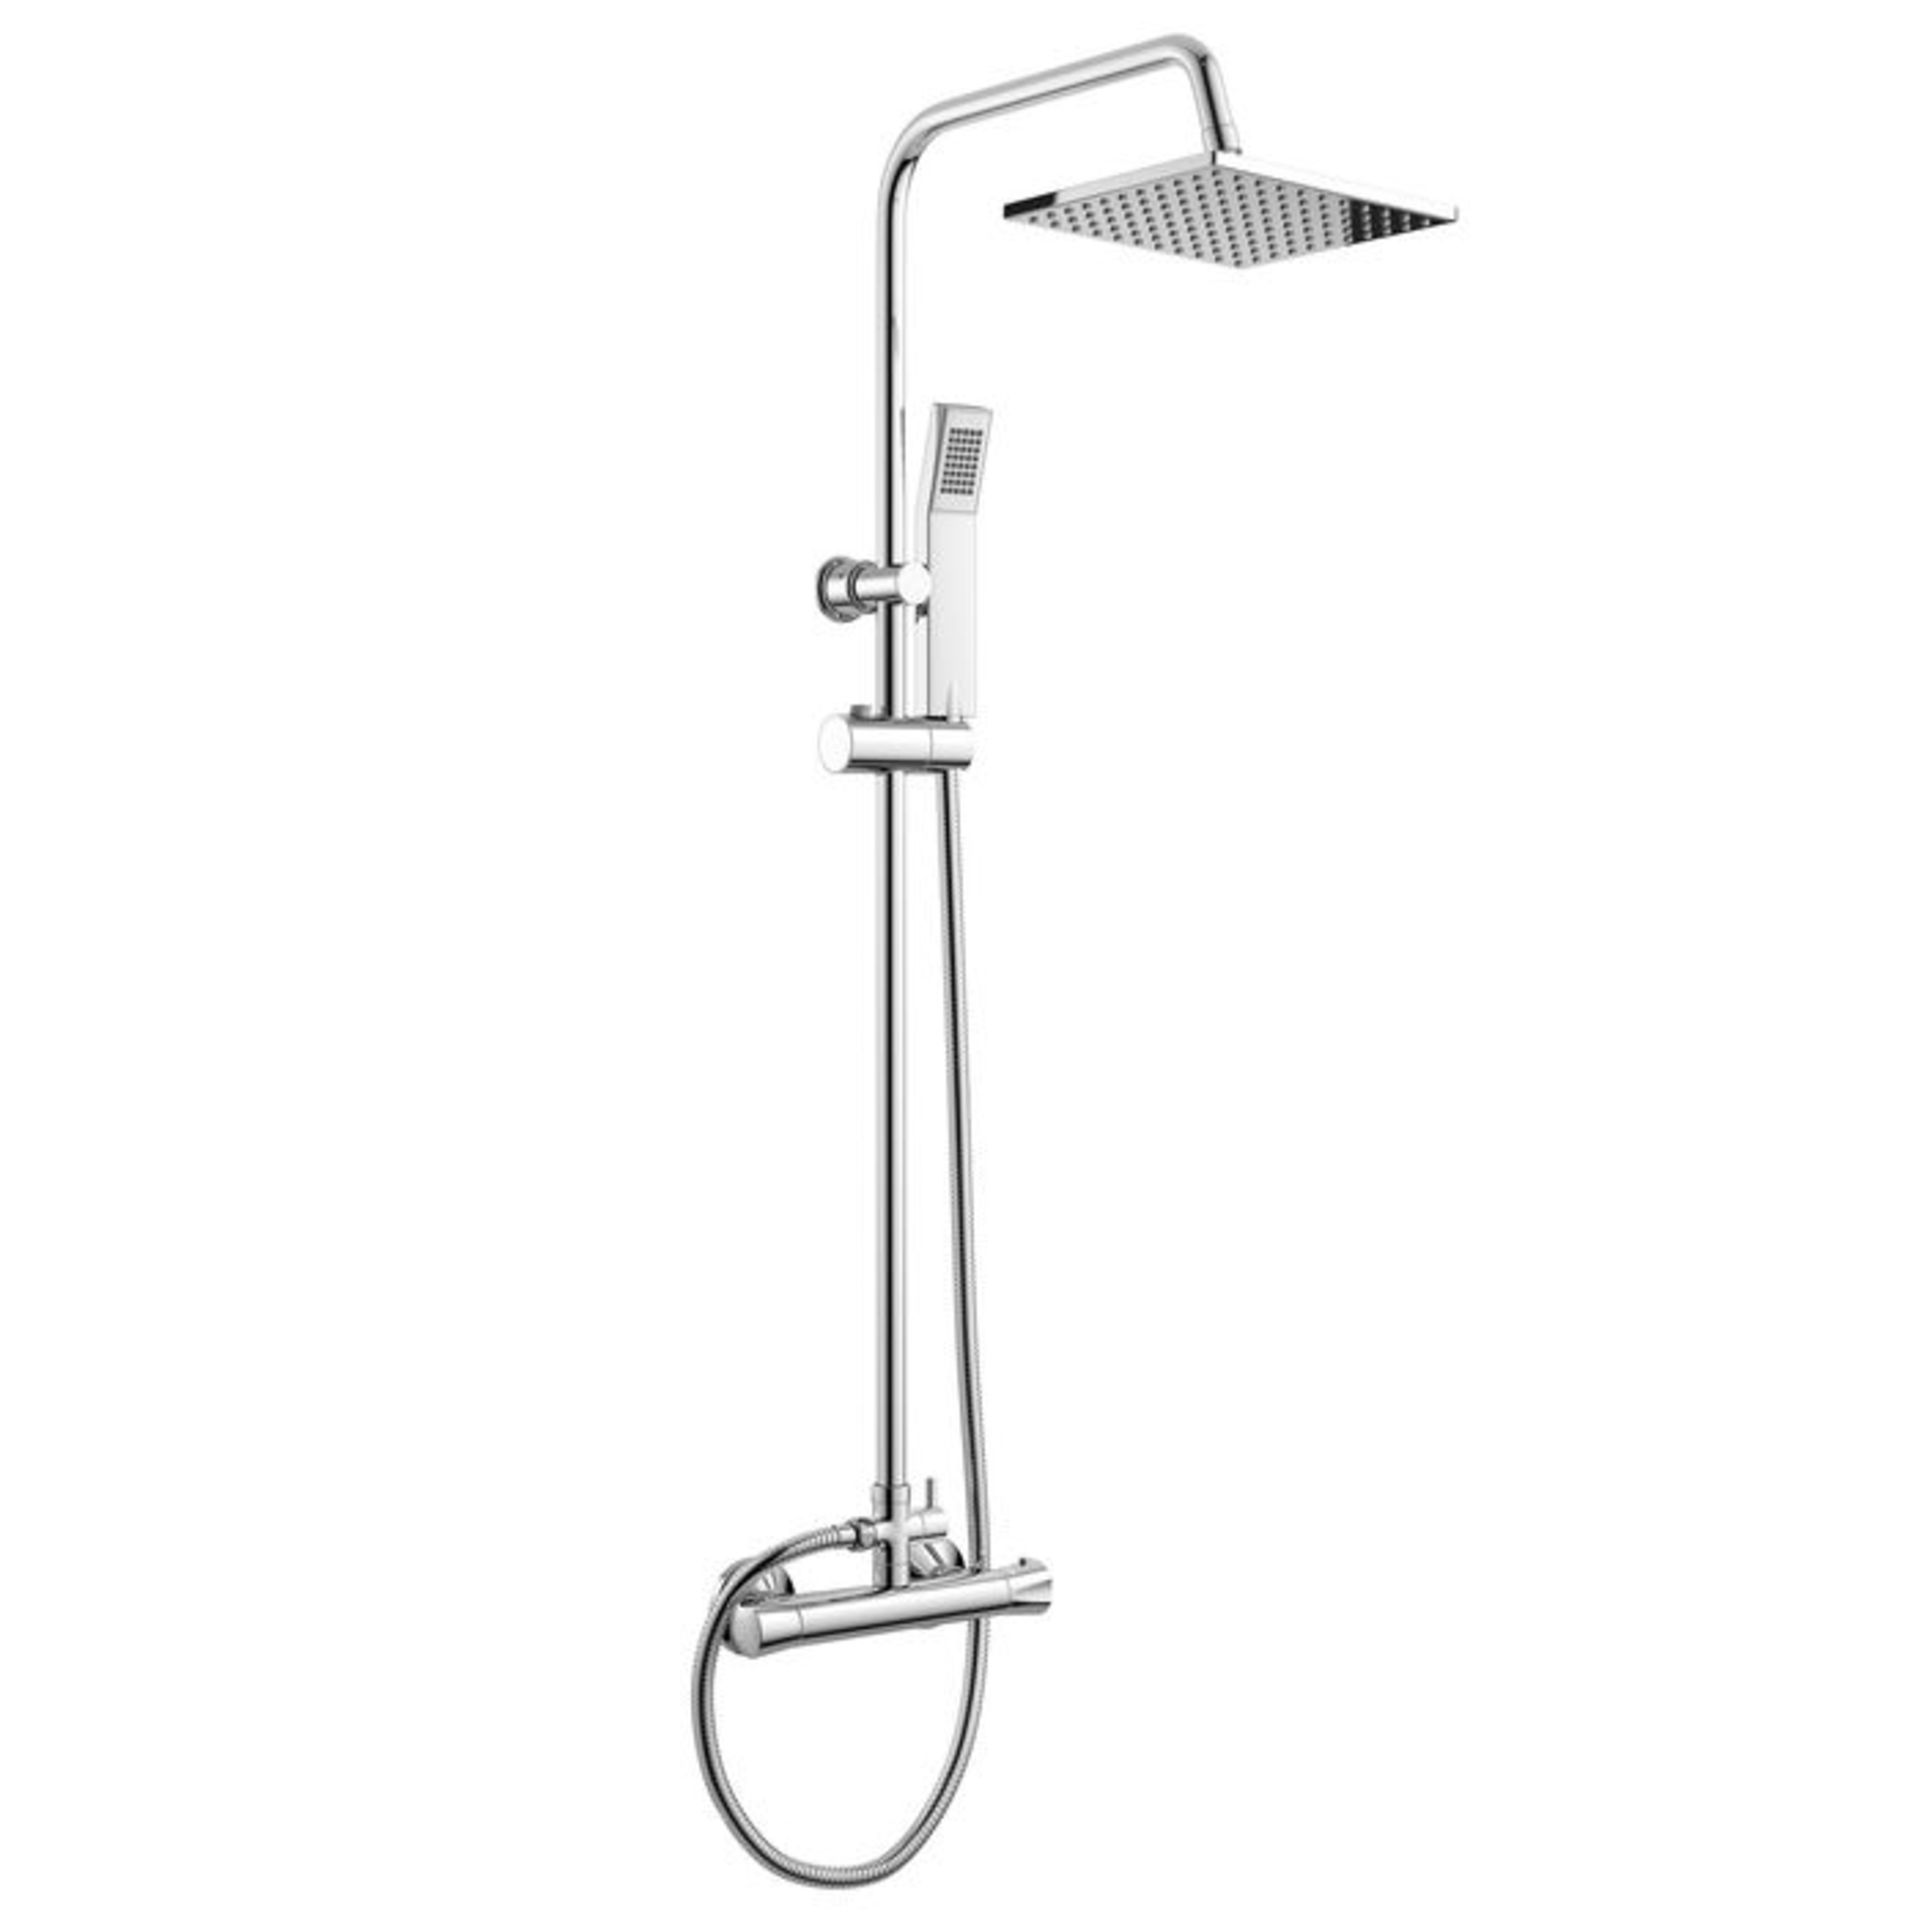 (L214) 200mm Square Head Thermostatic Exposed Shower Kit & Hand Held. We love this because it - Image 3 of 4